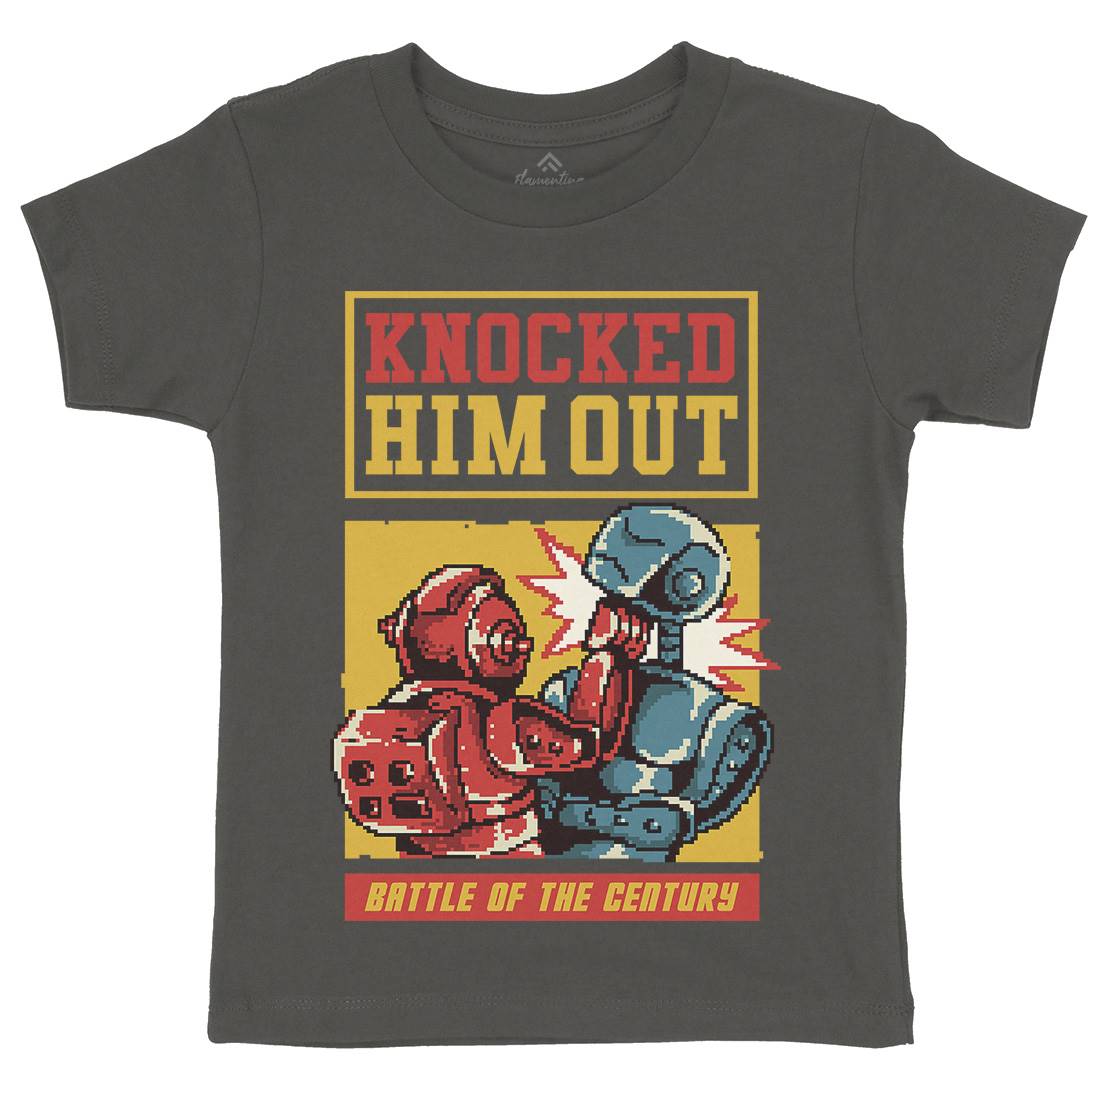 Knocked Him Out Kids Crew Neck T-Shirt Space B923